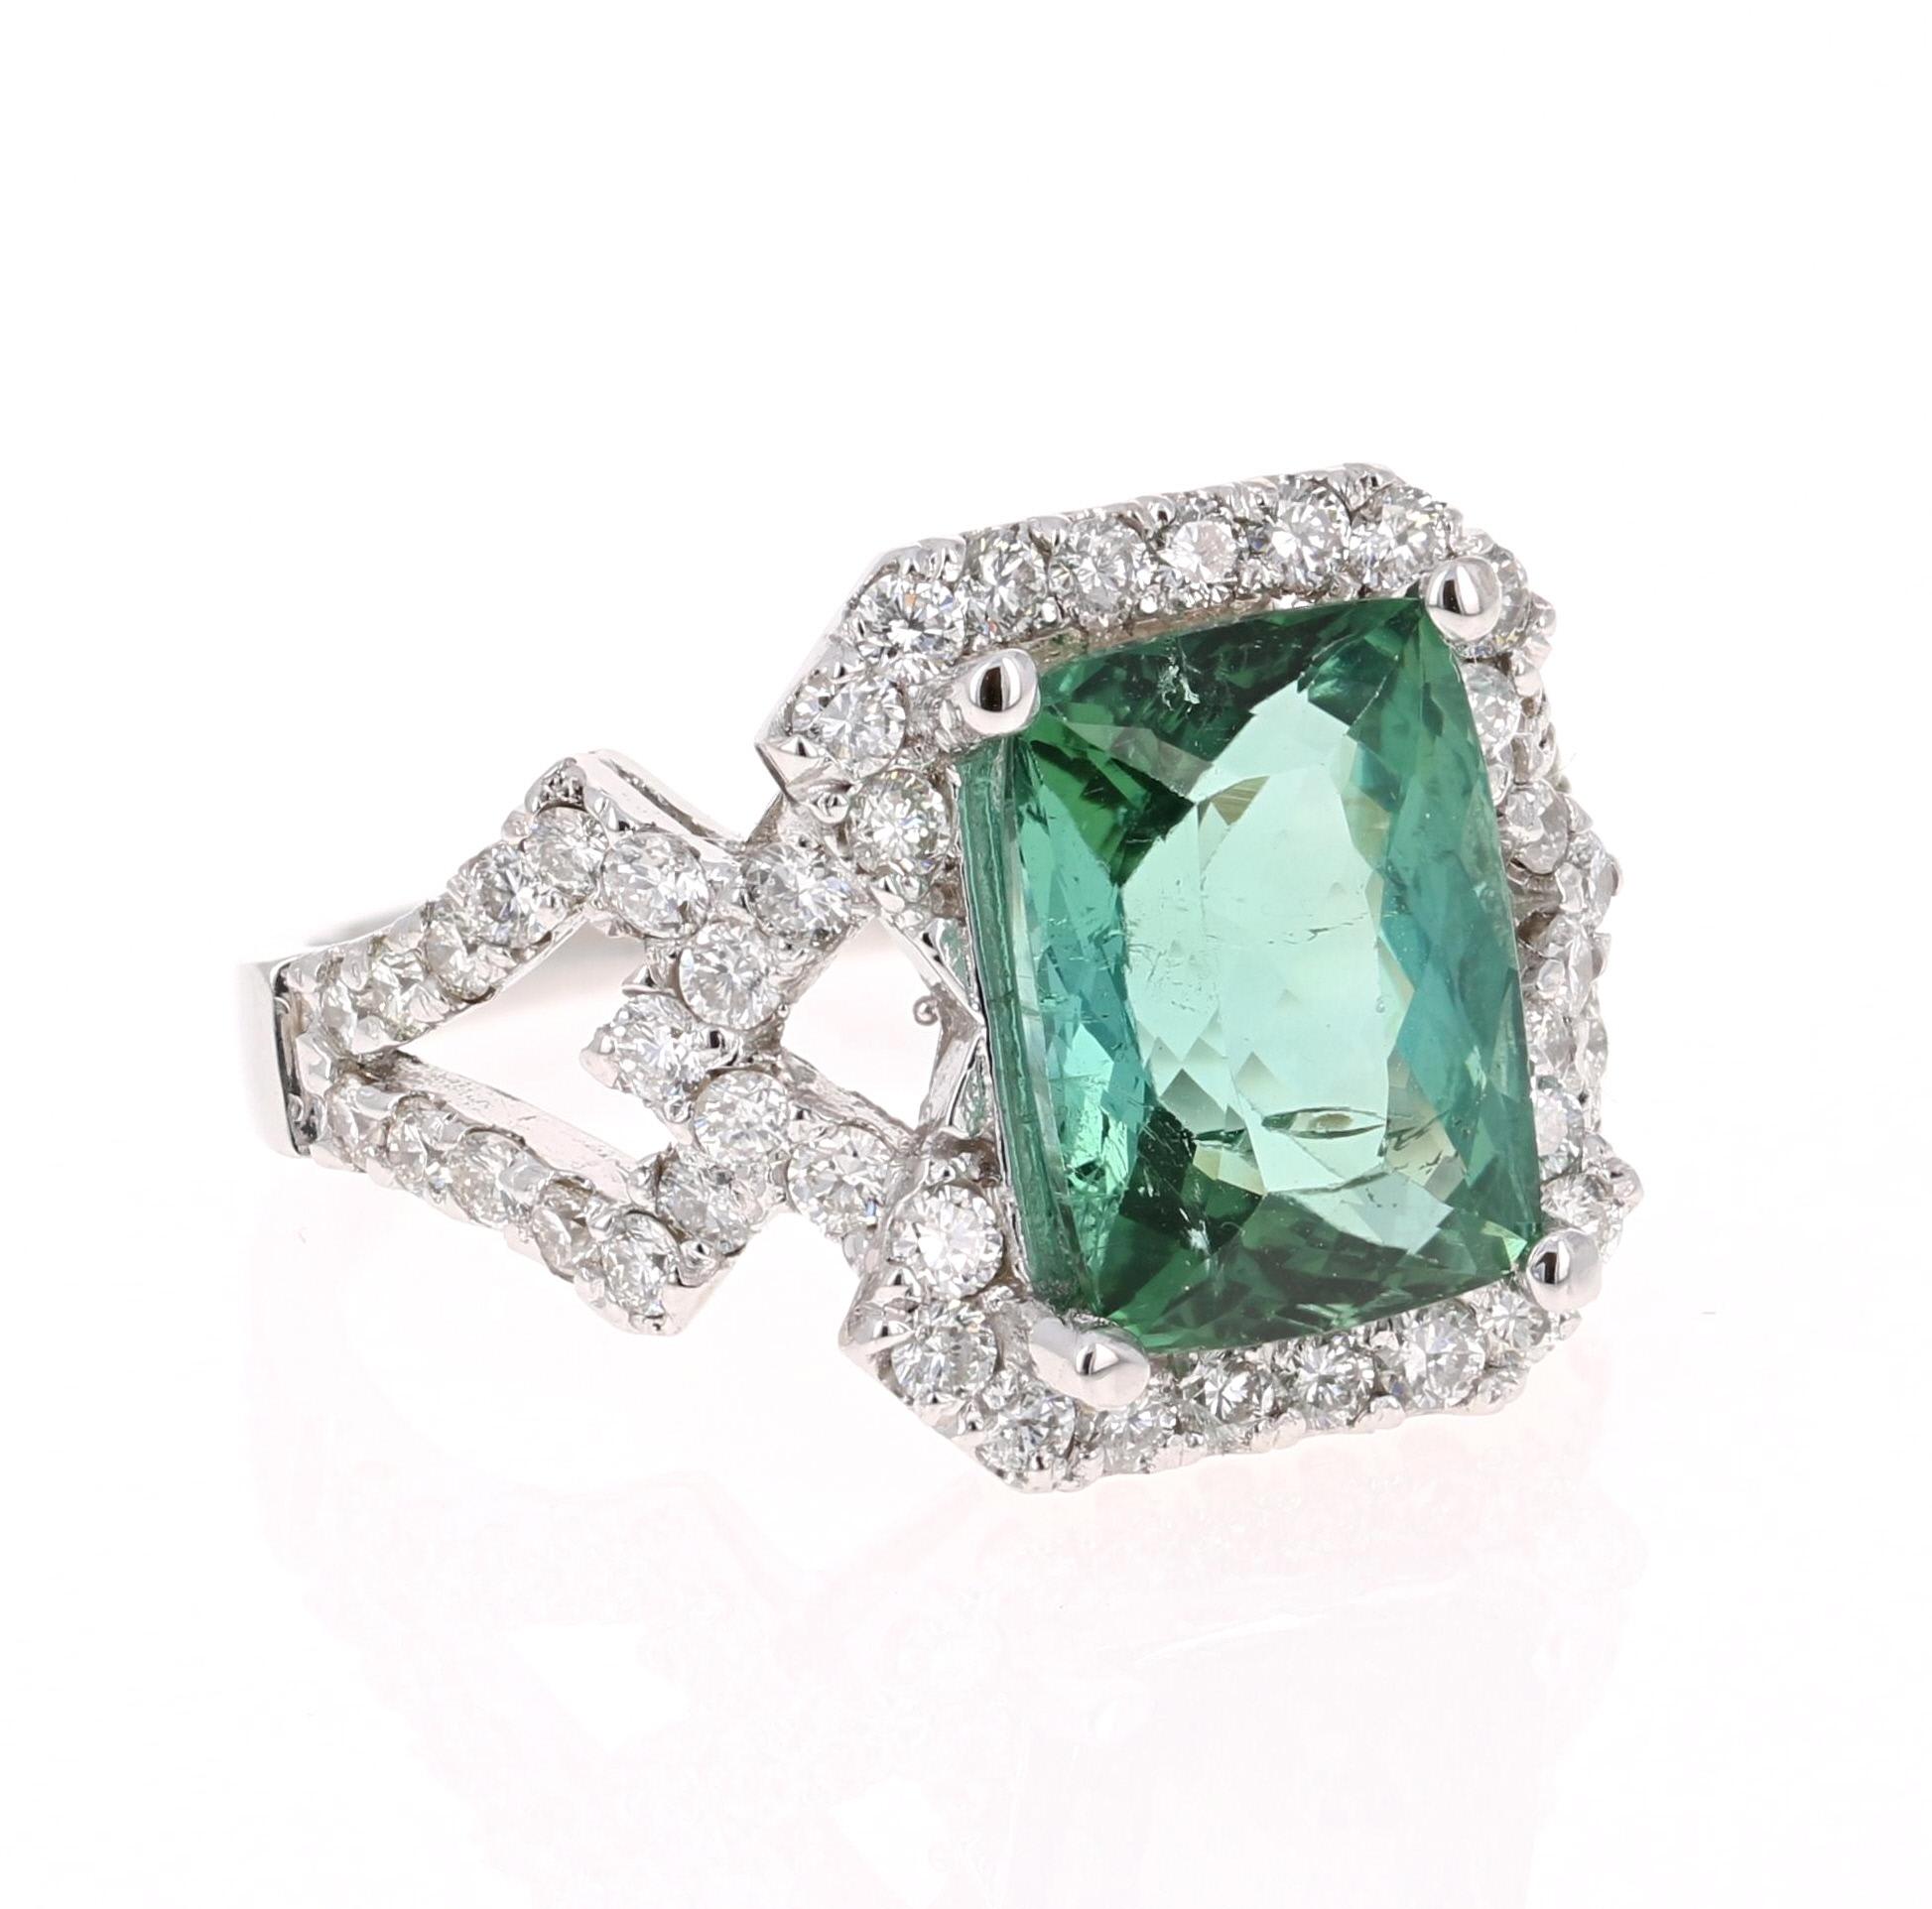 Gorgeous & Unique Cocktail Ring!

This ring has a STUNNING Emerald Cut Green Tourmaline that weighs 3.83 Carats. Floating around the tourmaline are 62 Round Cut Diamonds that weigh 0.98 Carats. The total carat weight of the ring is 4.81 Carats. The